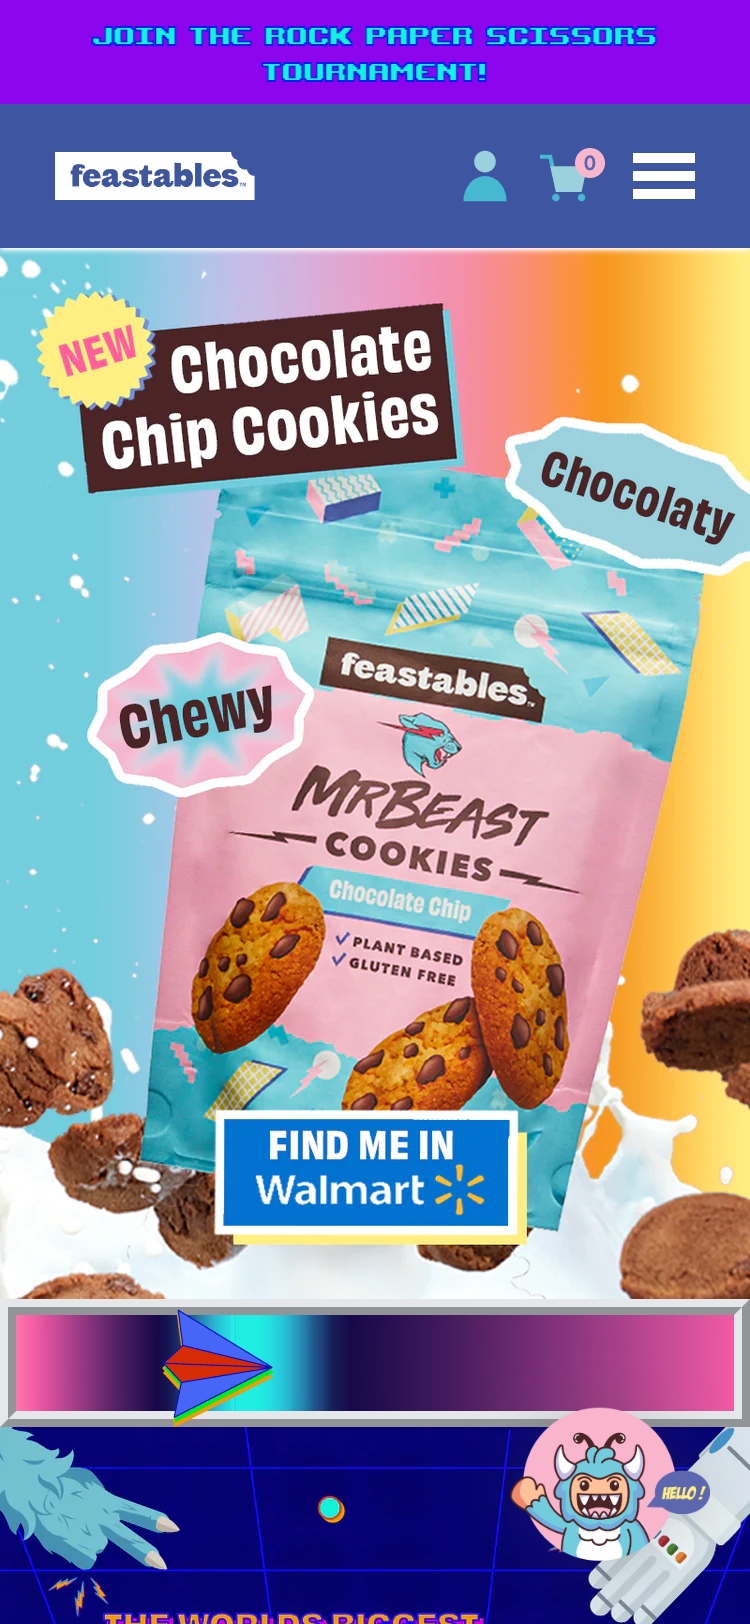 Mobile screenshot of the Feastables website. The hero section shows the packaging for 'Mr Beast Chocolate Chip Cookies' surrounded by an explosion of cookies and milk.